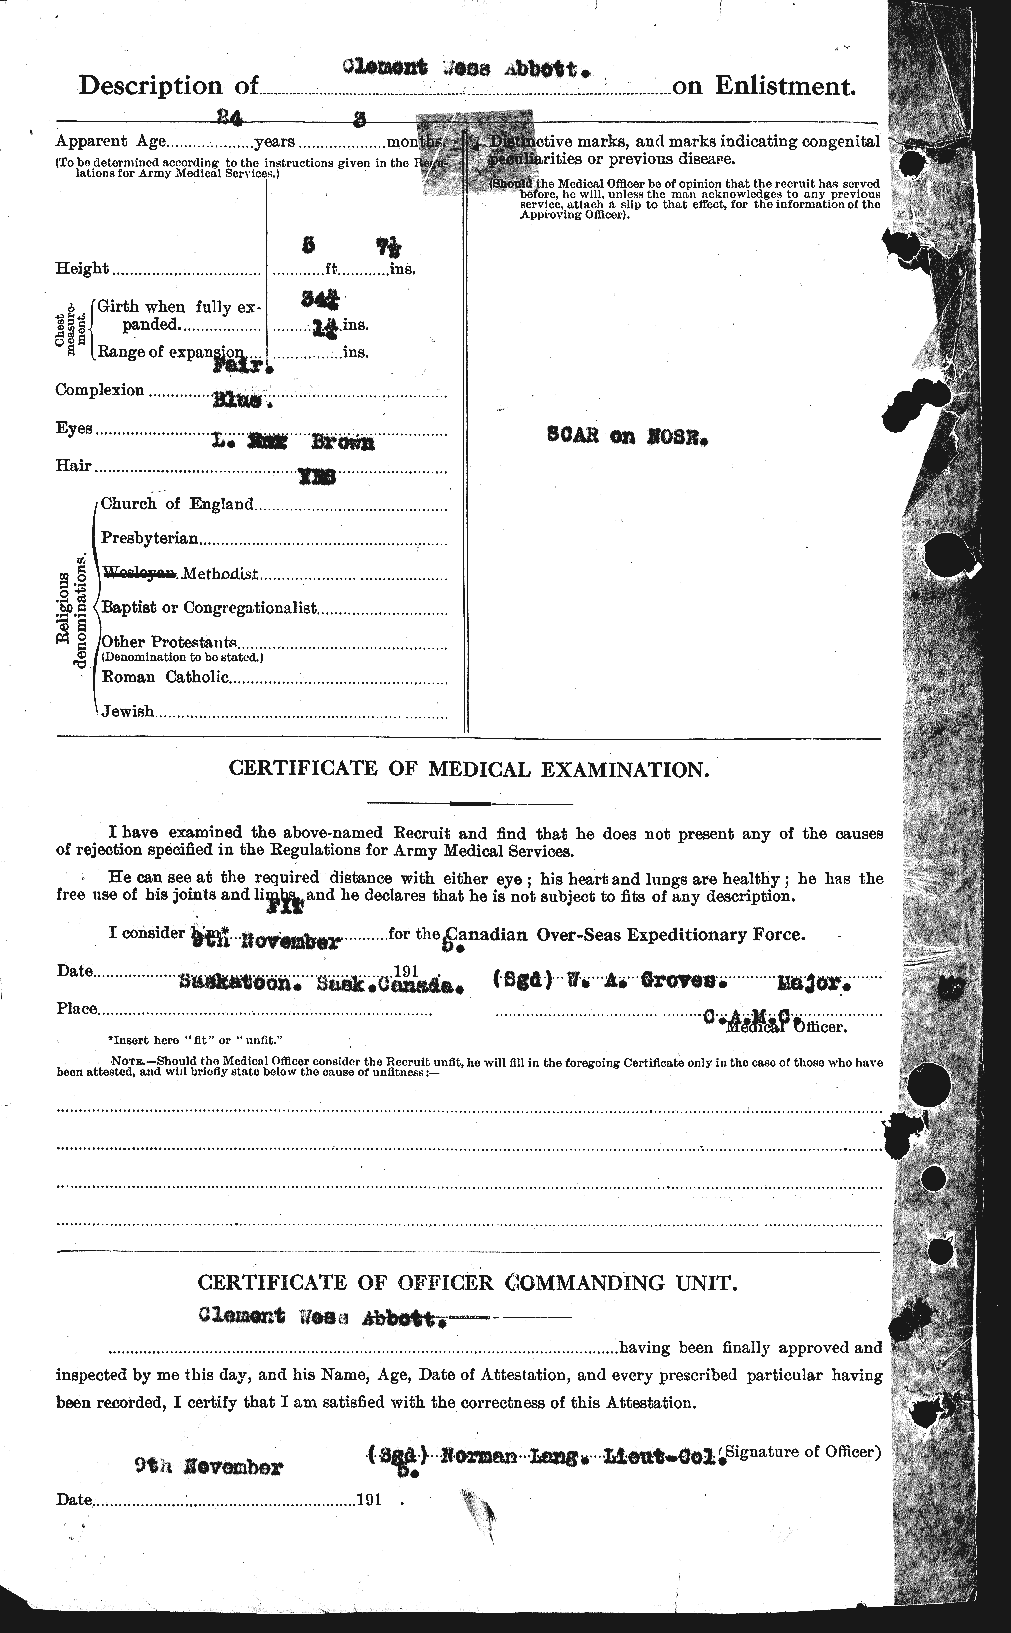 Personnel Records of the First World War - CEF 200896b